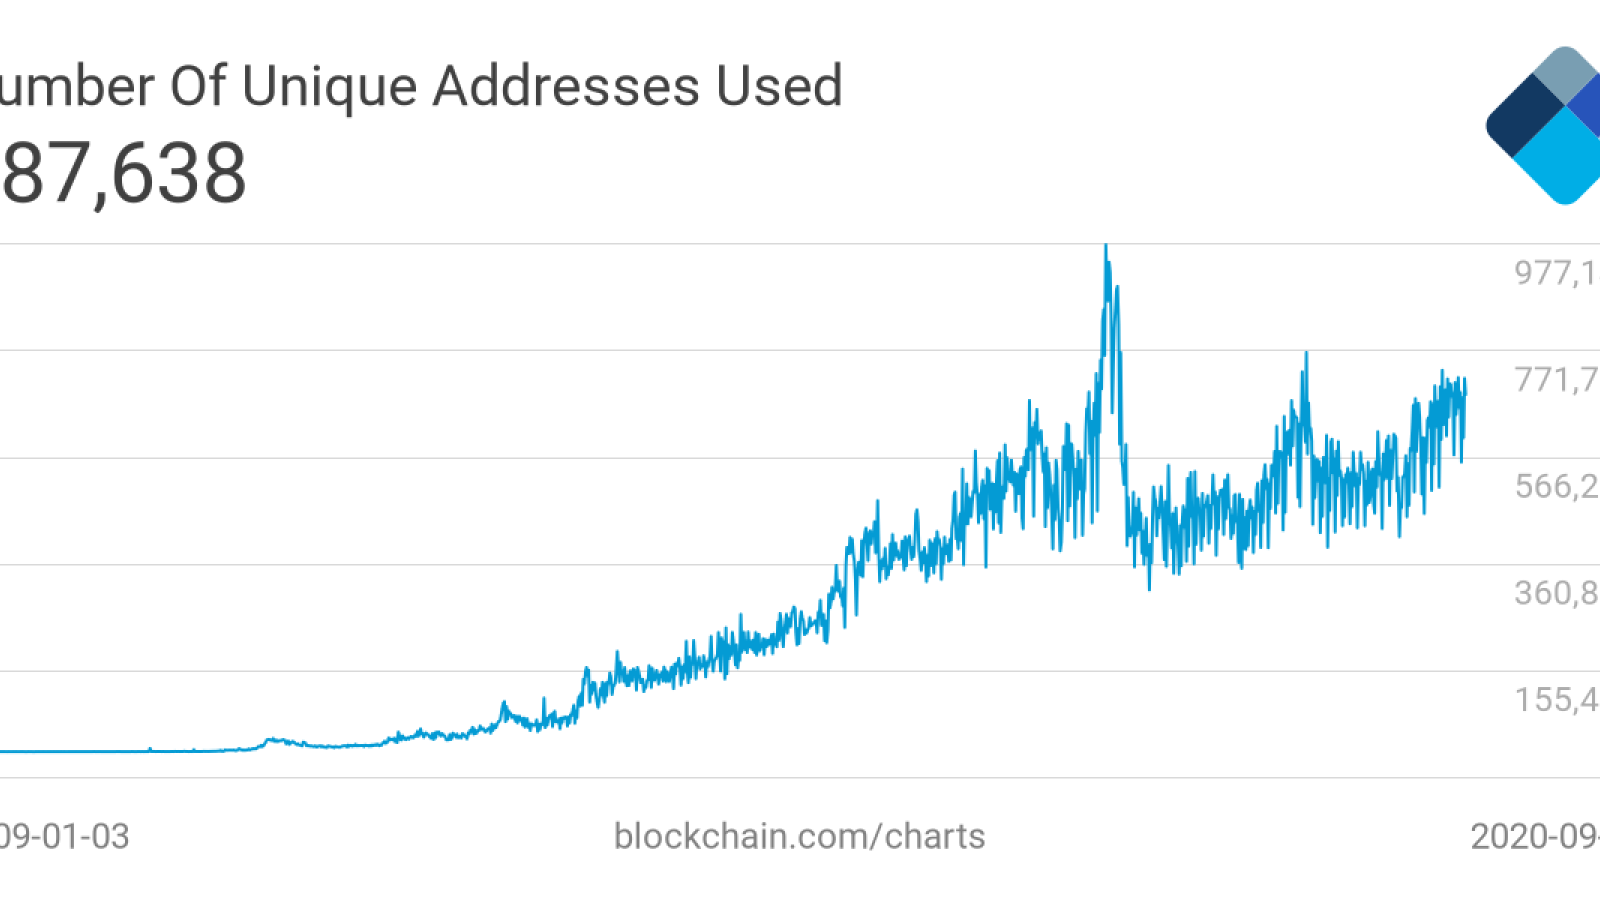 The number of unique addresses on the Bitcoin blockchain network.